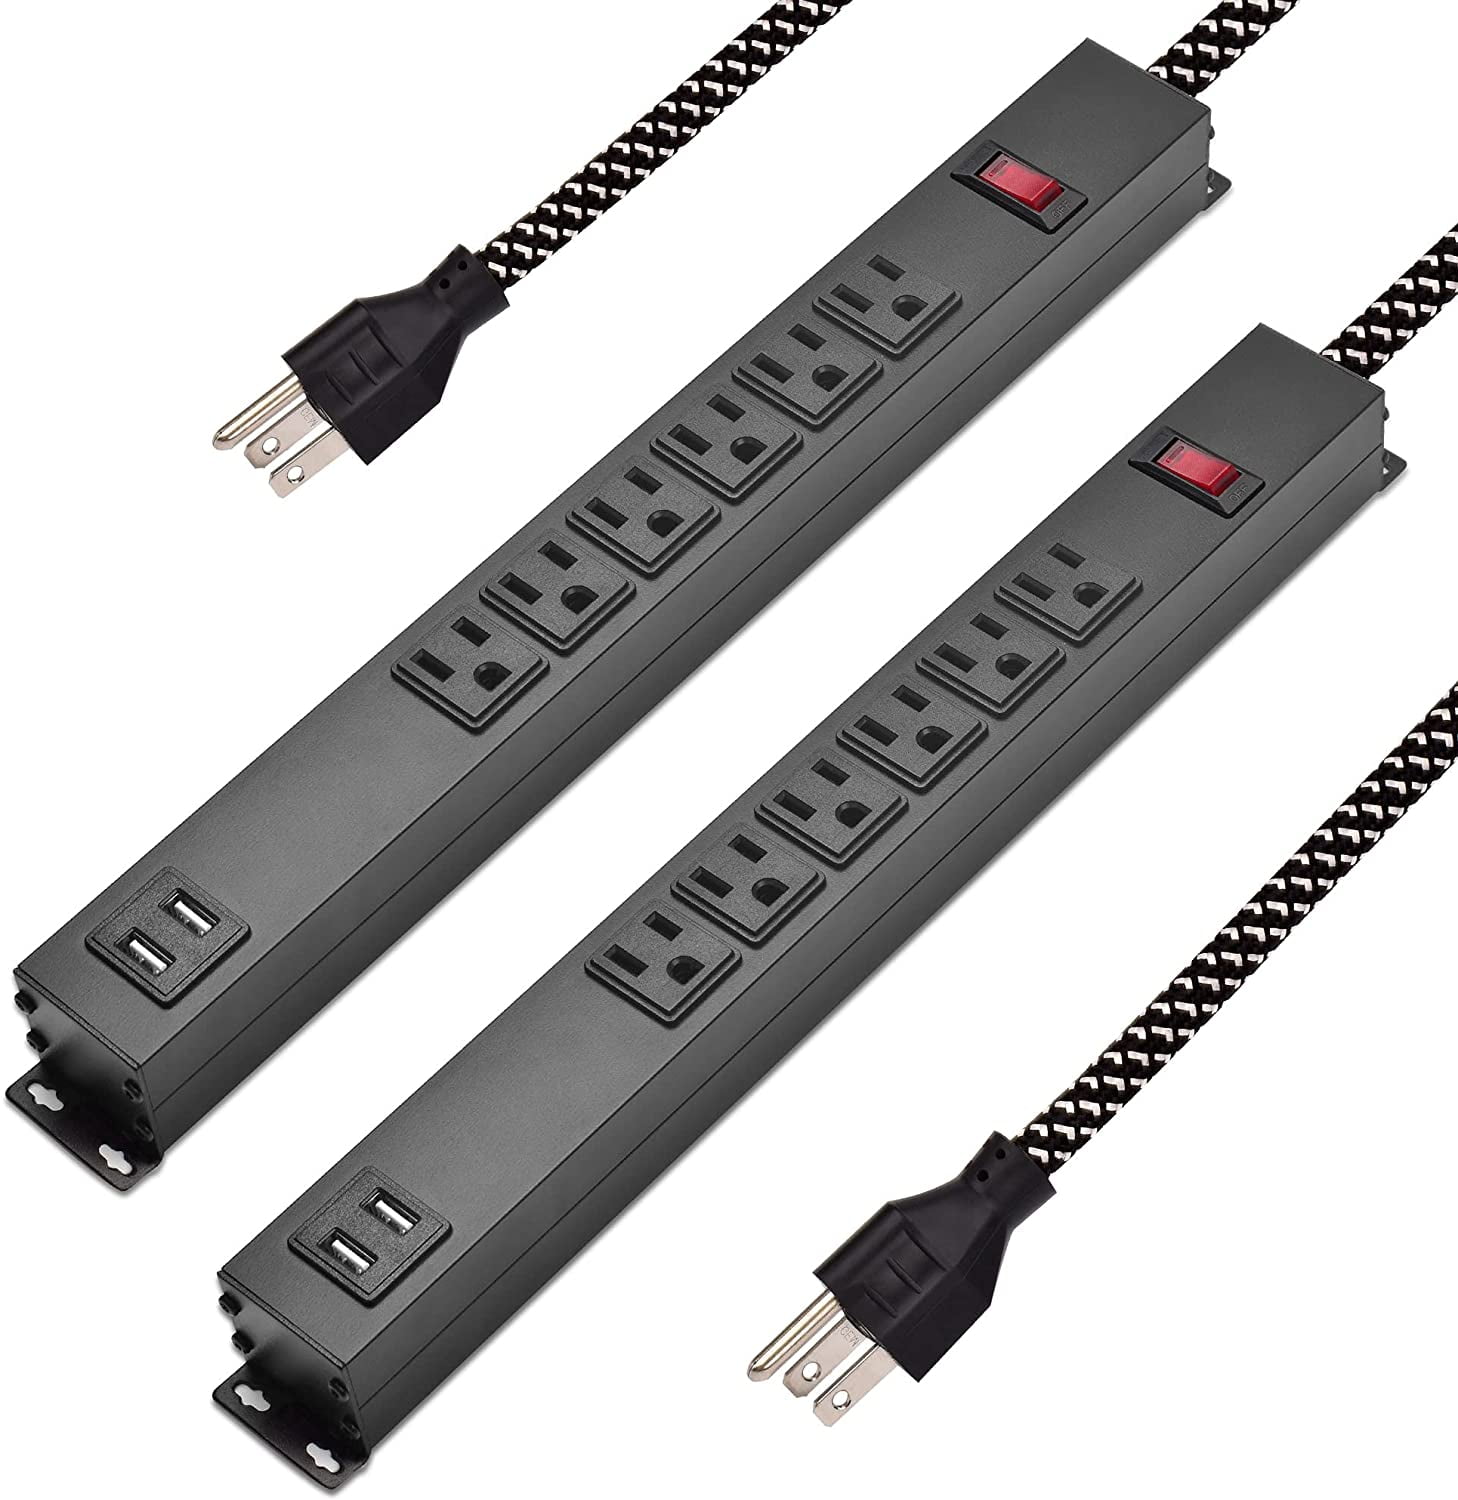 Details about   Multi Plug Extender Power Strip with 2 Outlets+3 USB Ports 5 ft Extension Cord 